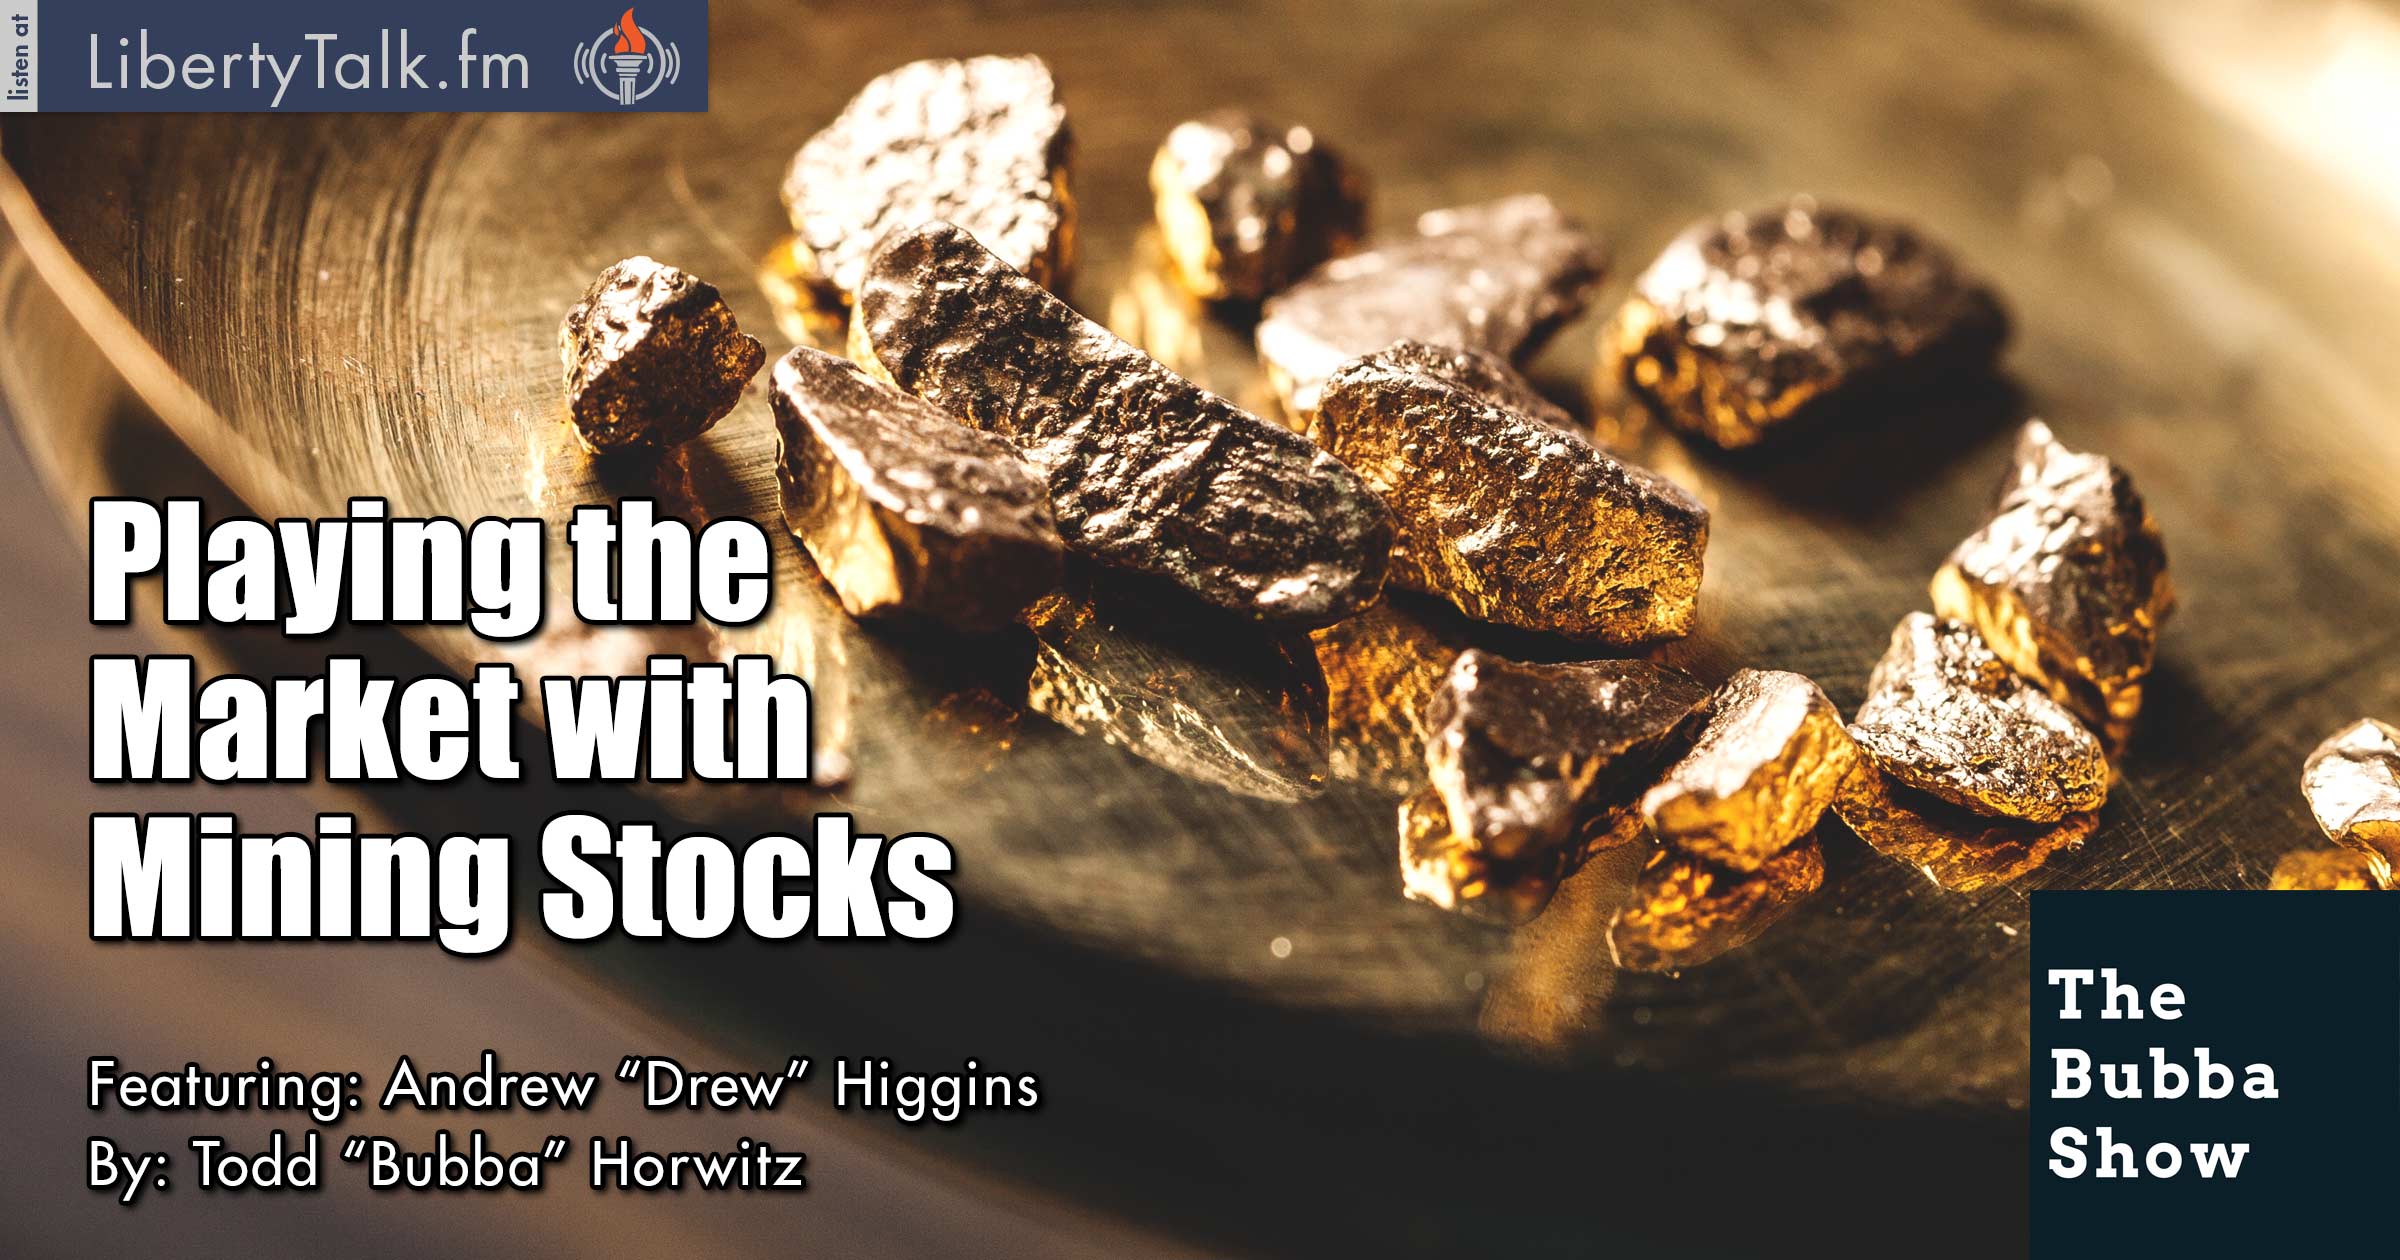 RPlaying the Market with Mining Stocks - Bubba Show